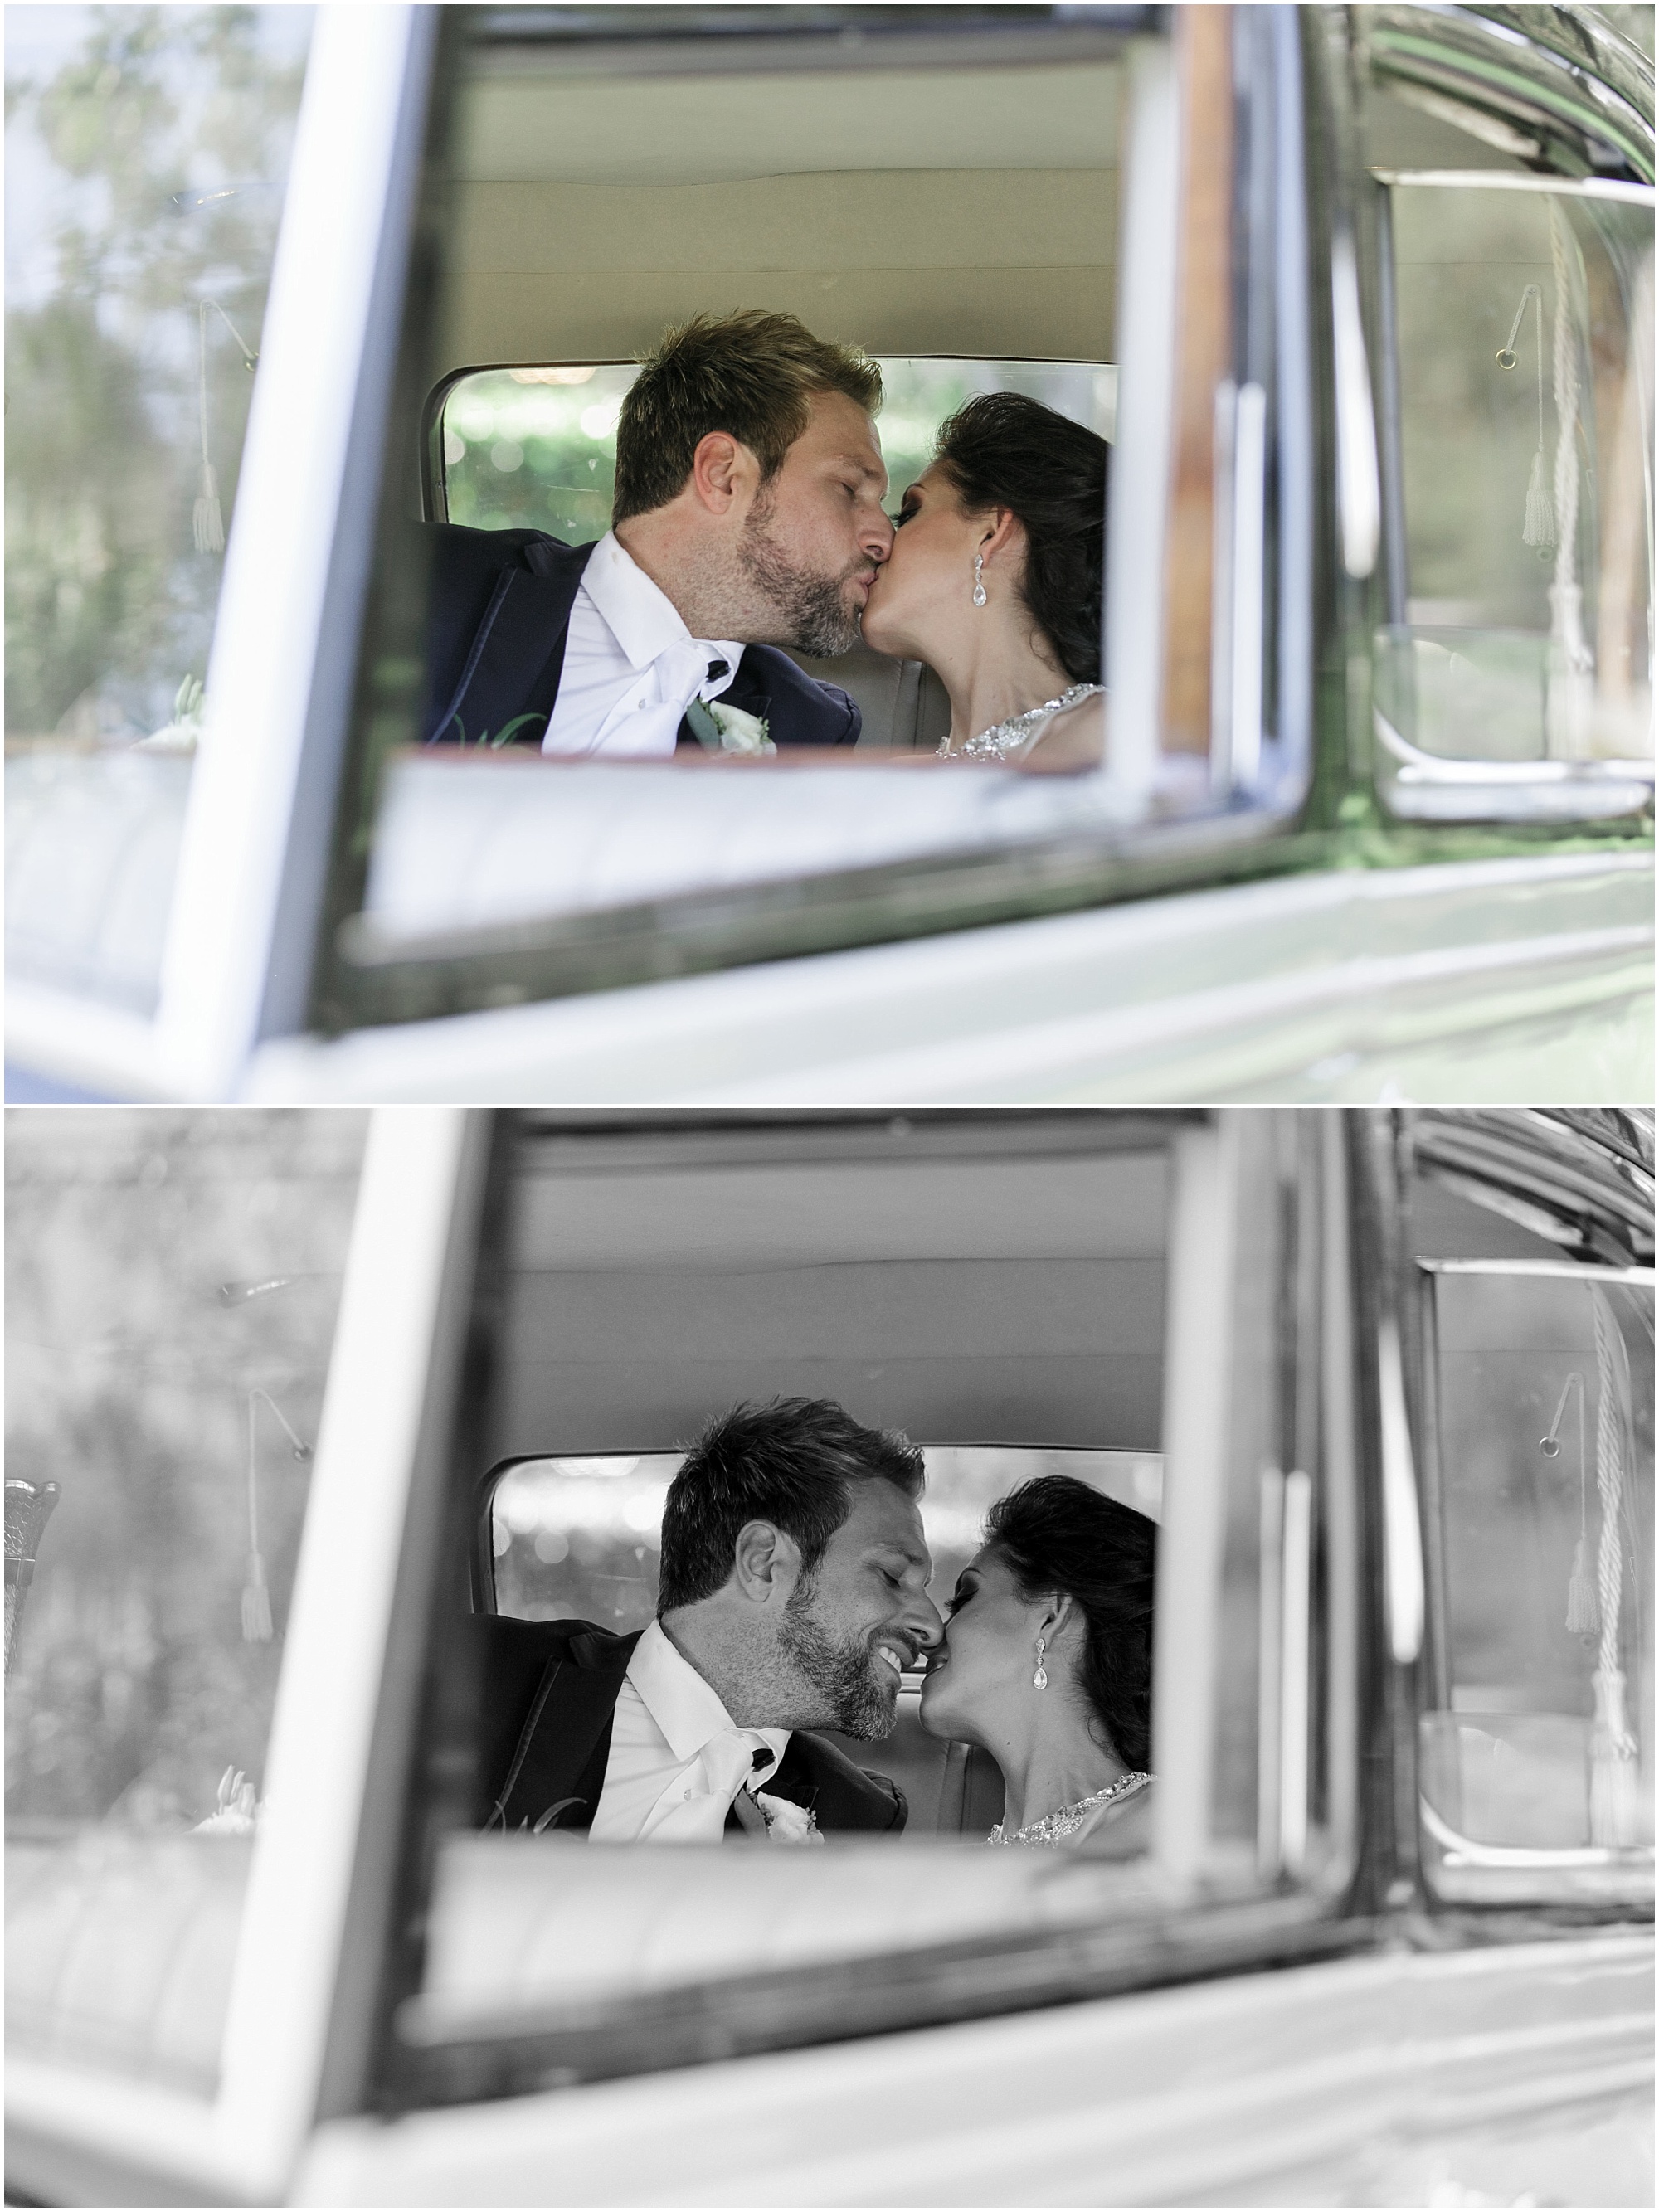 Southern Elegance couple snuggling and kissing in antique car.